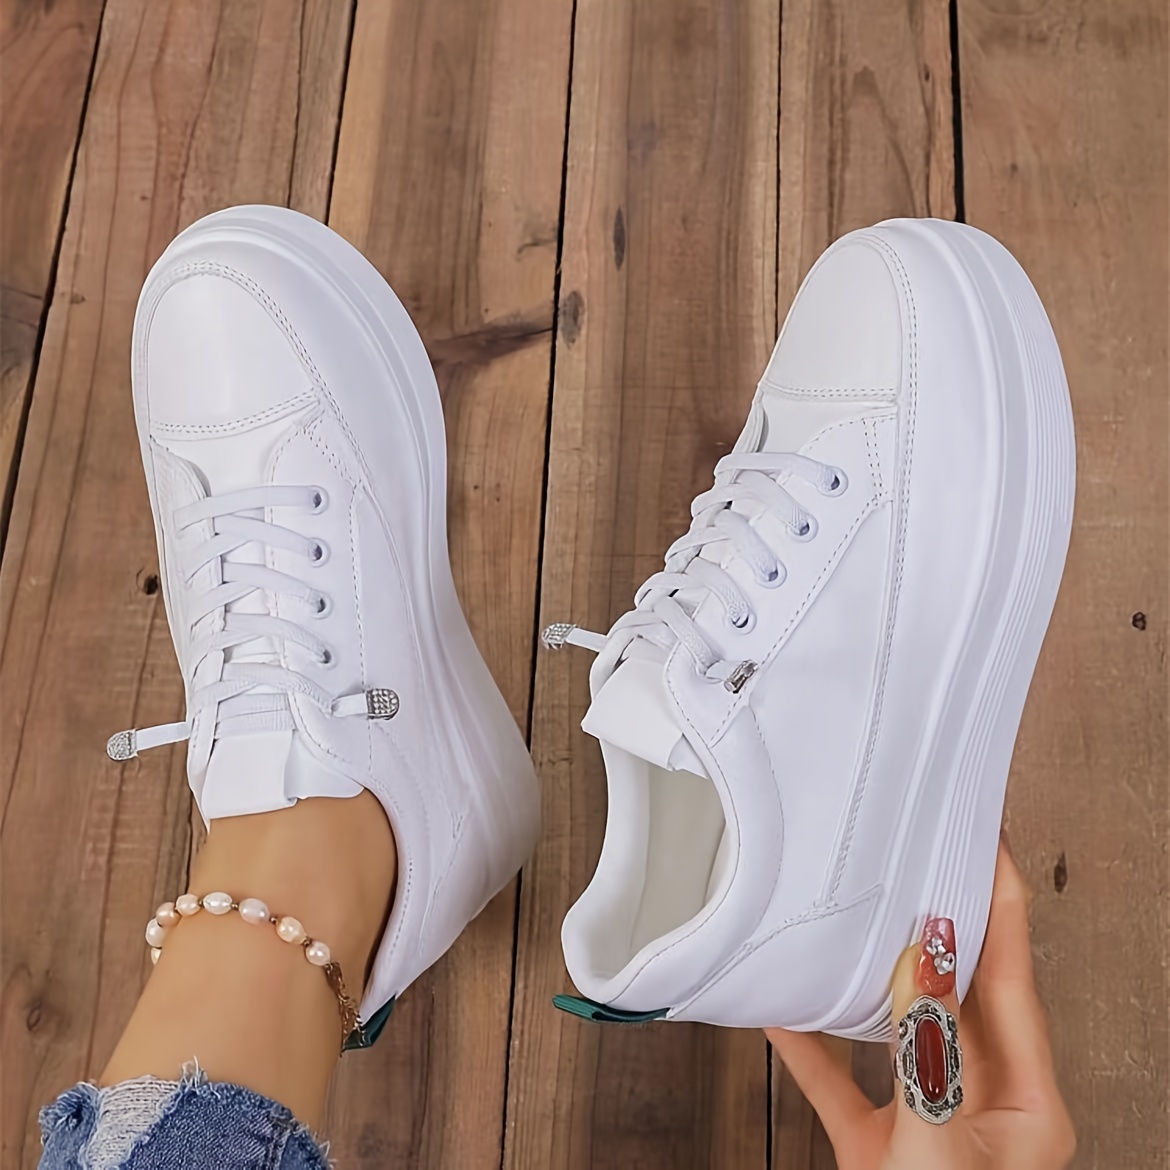 

Women's White Platform Sneakers, Casual Lace-up Fashion Shoes With Soft Sole, Comfortable Walking Footwear For Daily Wear